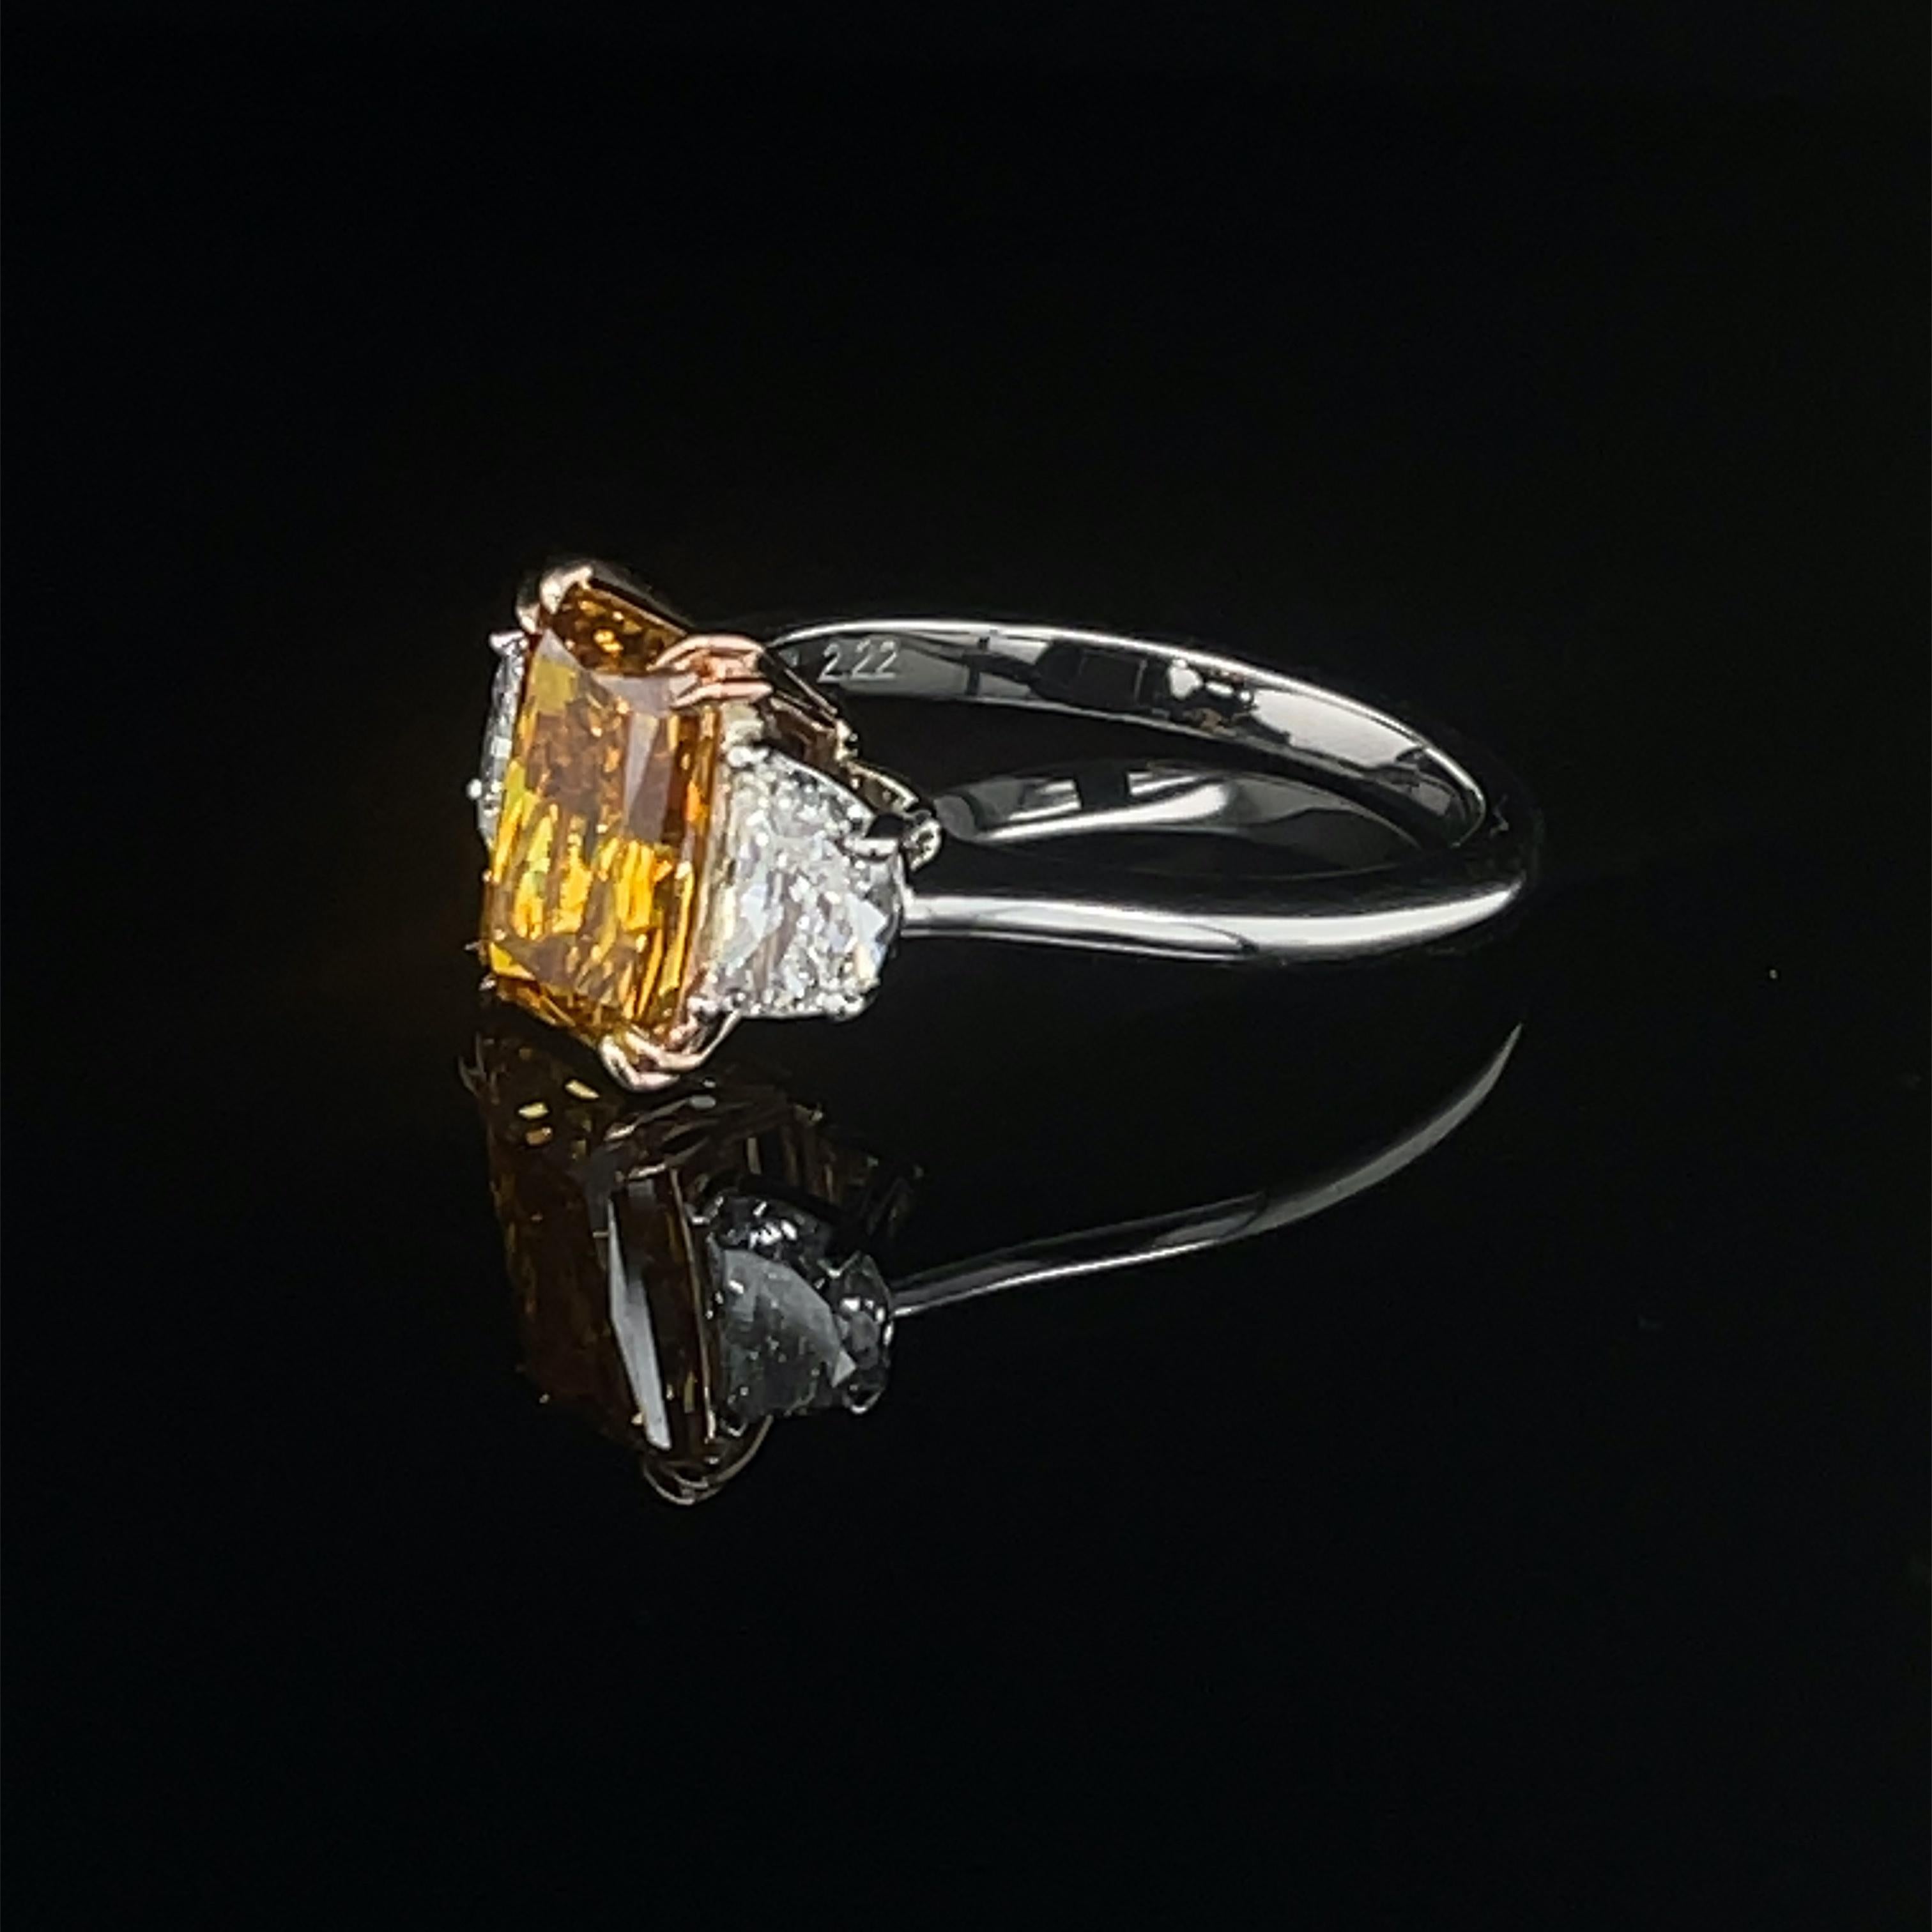 Super Rare, Collector's Grade

2.22ct Fancy Deep Yellowish Orange Diamond

Radiant cut Diamond, Clarity VS1

Beautifully crafted  and Set in a platinum ring with 2 HM diamonds = 0.73cttw

Orange diamonds are without a doubt among the most cherished